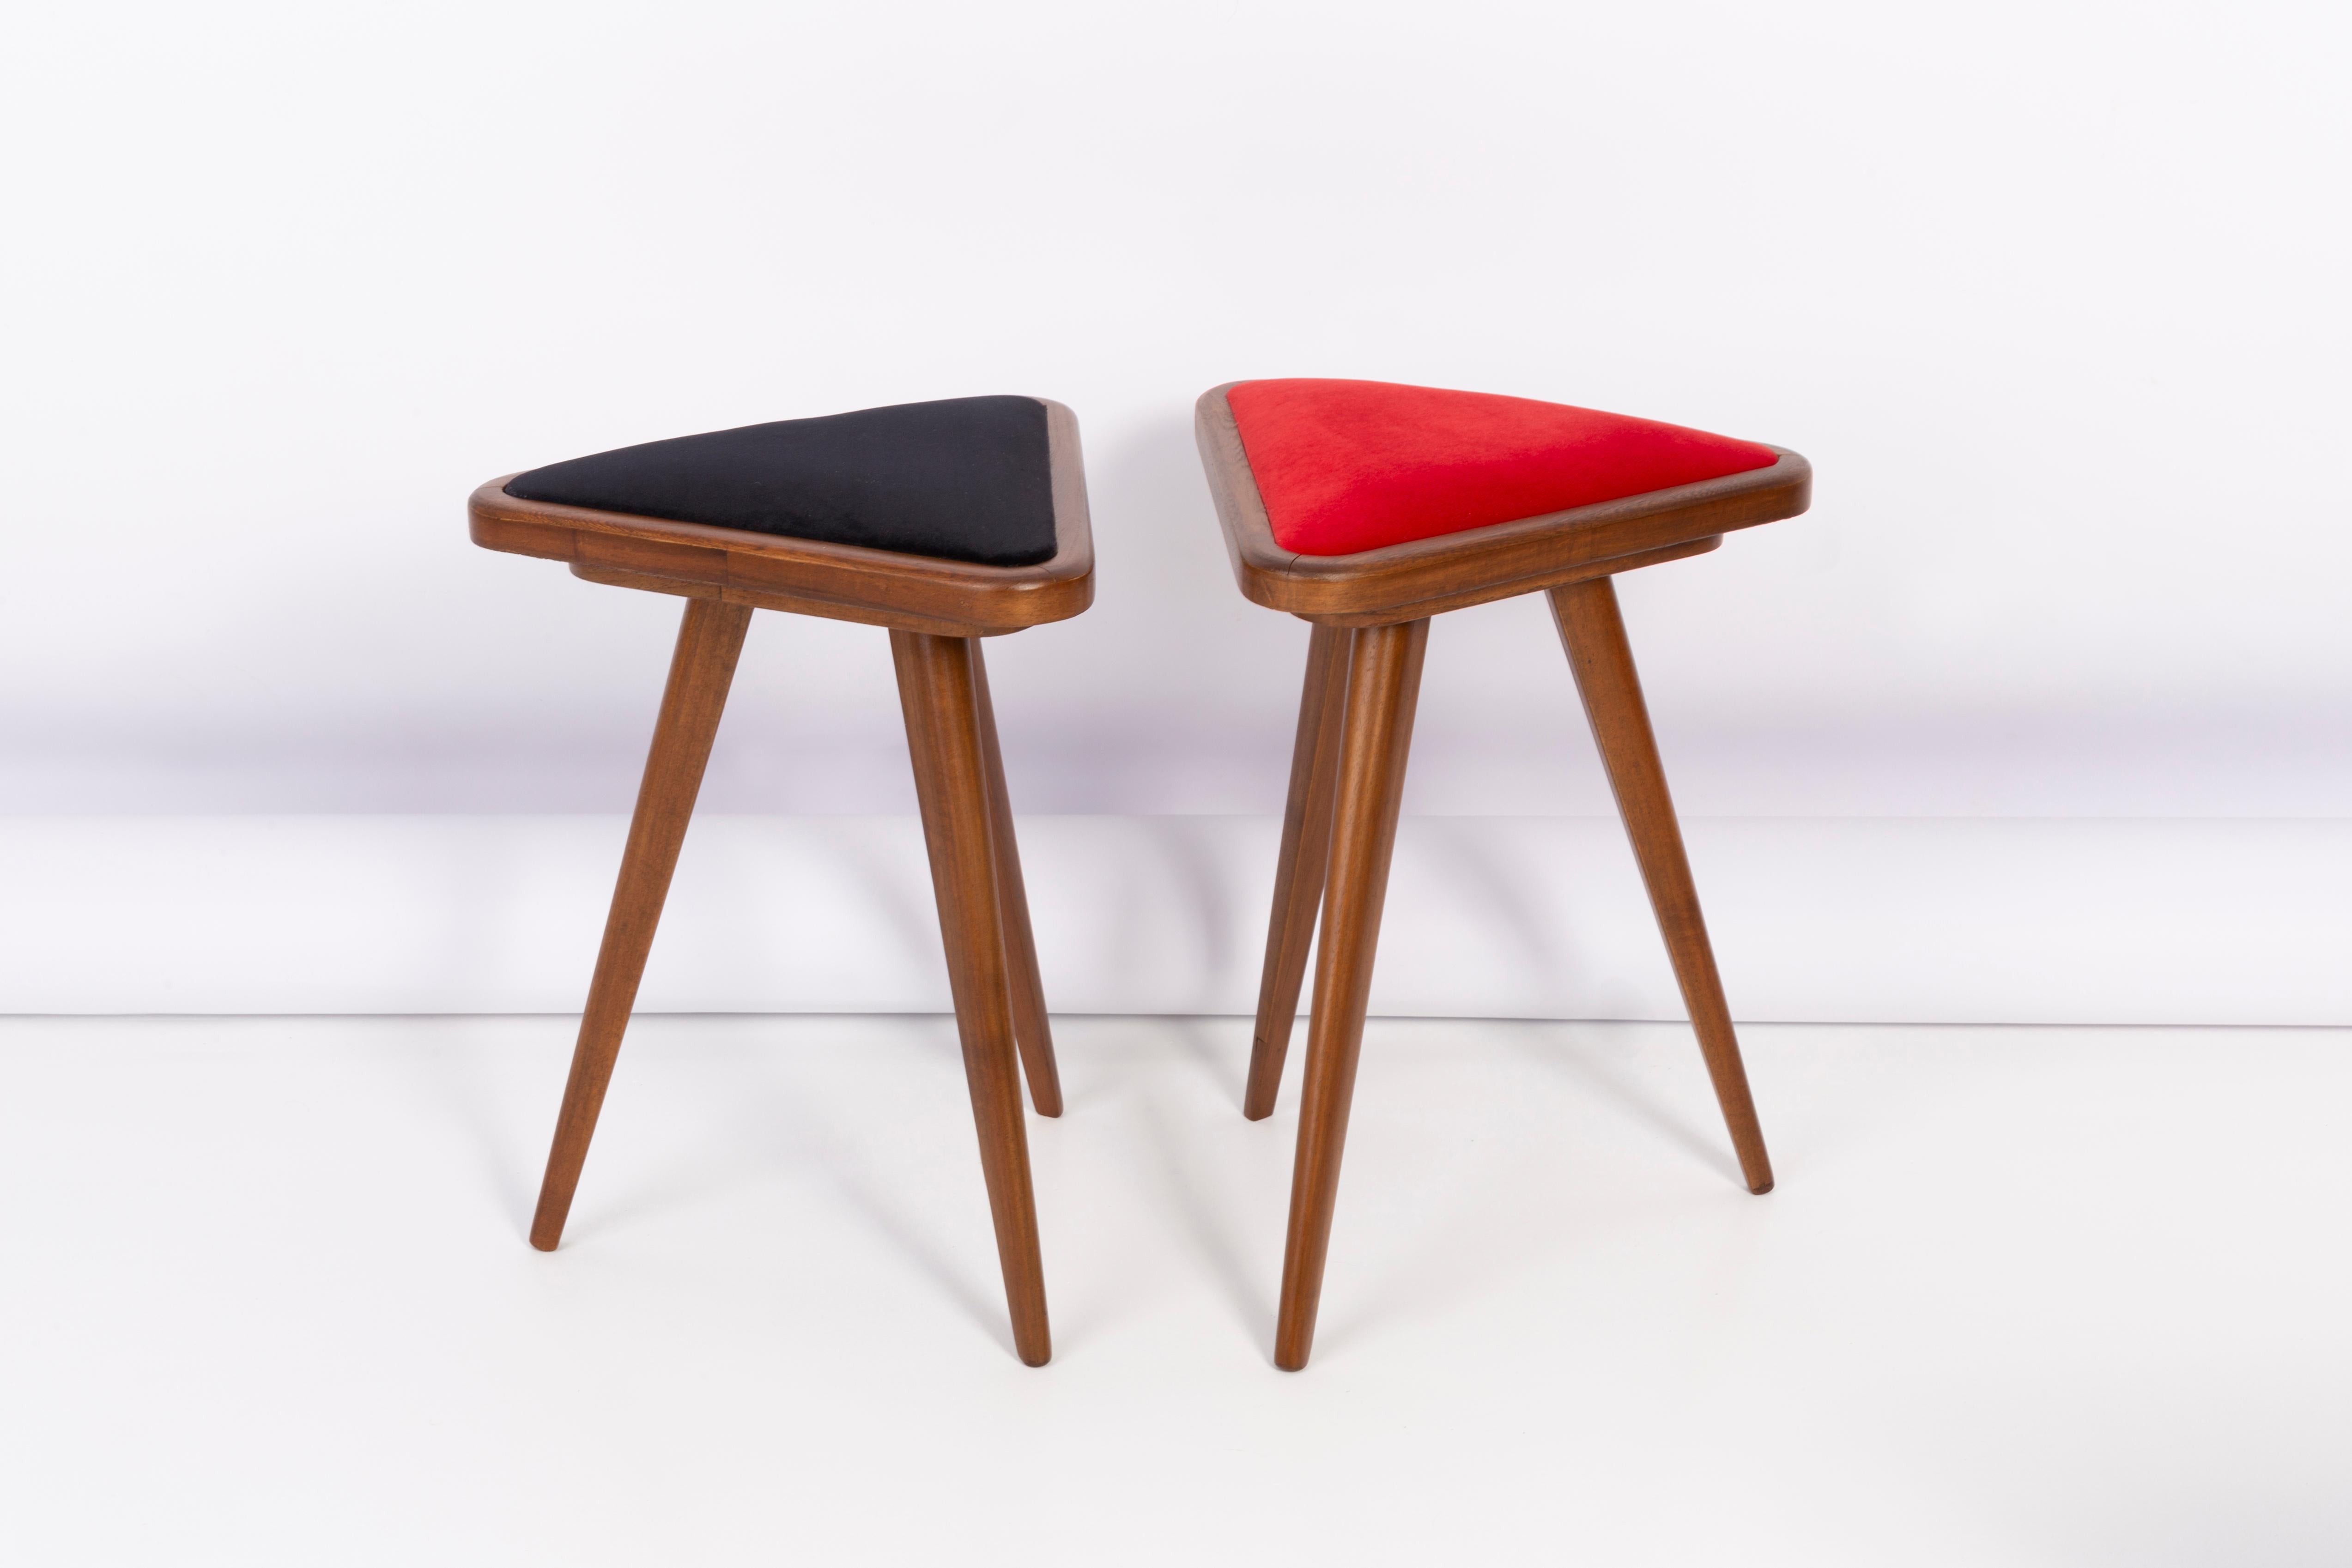 Stools from the turn of the 1960s and 1970s. Beautiful velour upholstery in 2 different colors. The stools consists of an upholstered part, a seat and wooden legs narrowing downwards, characteristic of the 1960s style. They are absolutely